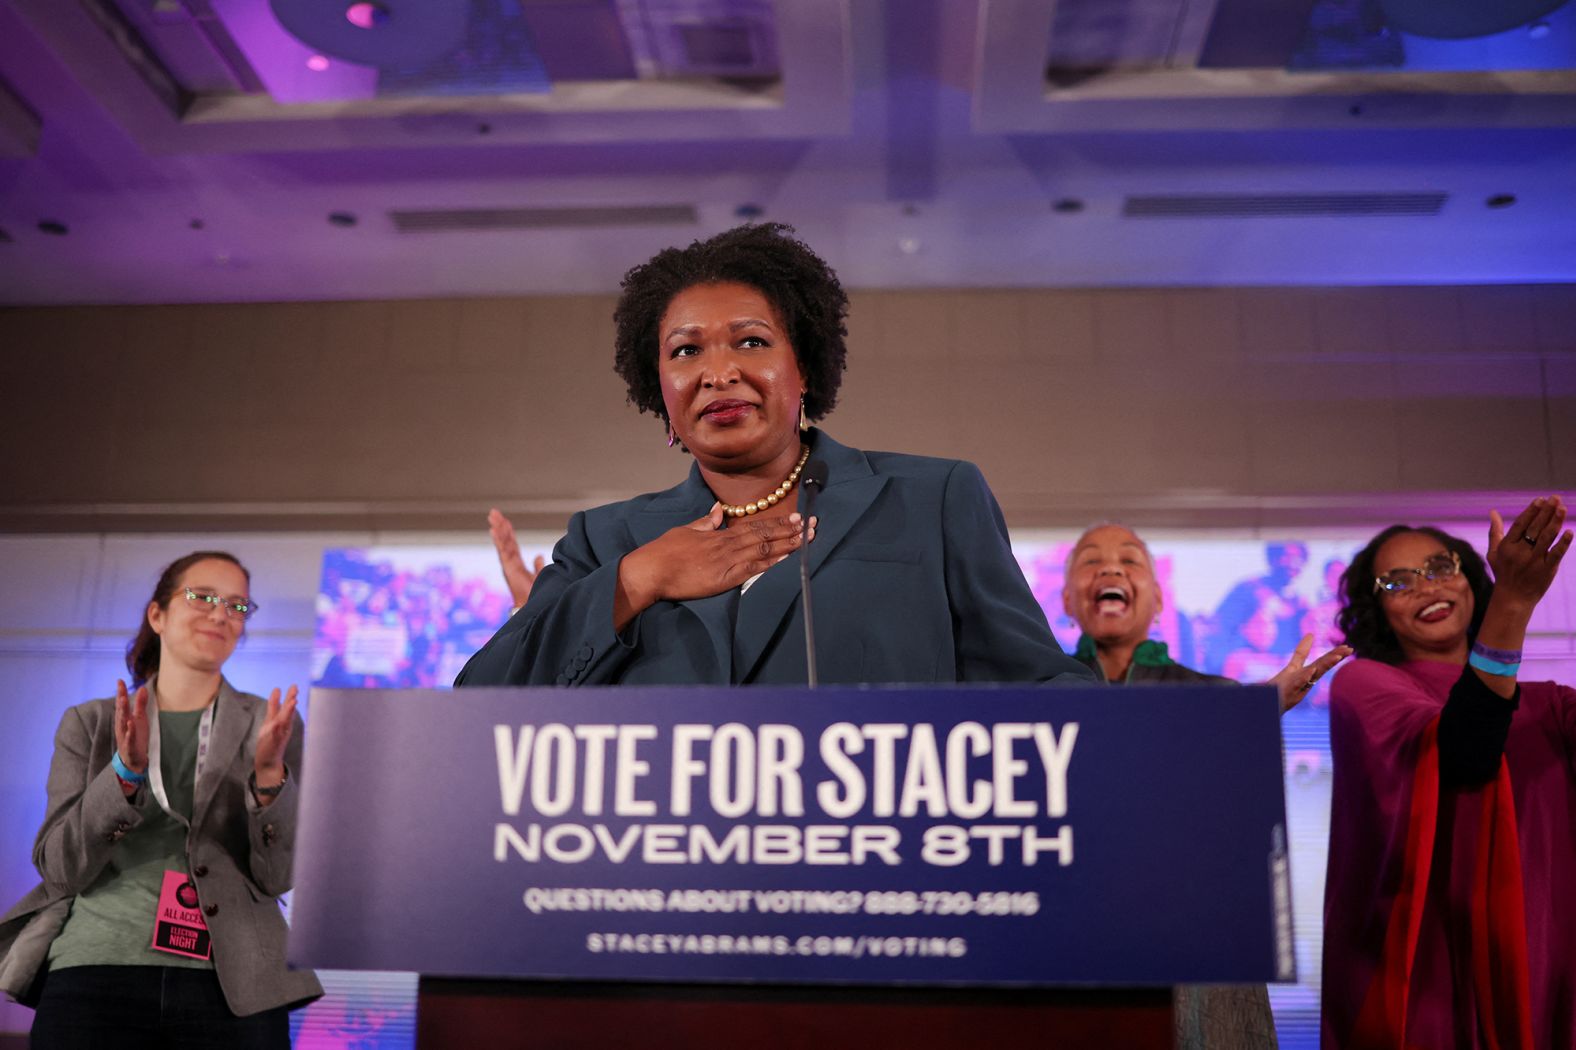 Democrat Stacey Abrams, who was running for governor in Georgia, gives a speech during her election night party in Atlanta. <a href="index.php?page=&url=https%3A%2F%2Fwww.cnn.com%2Fpolitics%2Flive-news%2Fmidterm-election-results-livestream-voting-11-08-2022%2Fh_bc3f7ca932677a3988a594868069e9dd" target="_blank">CNN projected</a> that Abrams would lose her race to incumbent Brian Kemp.